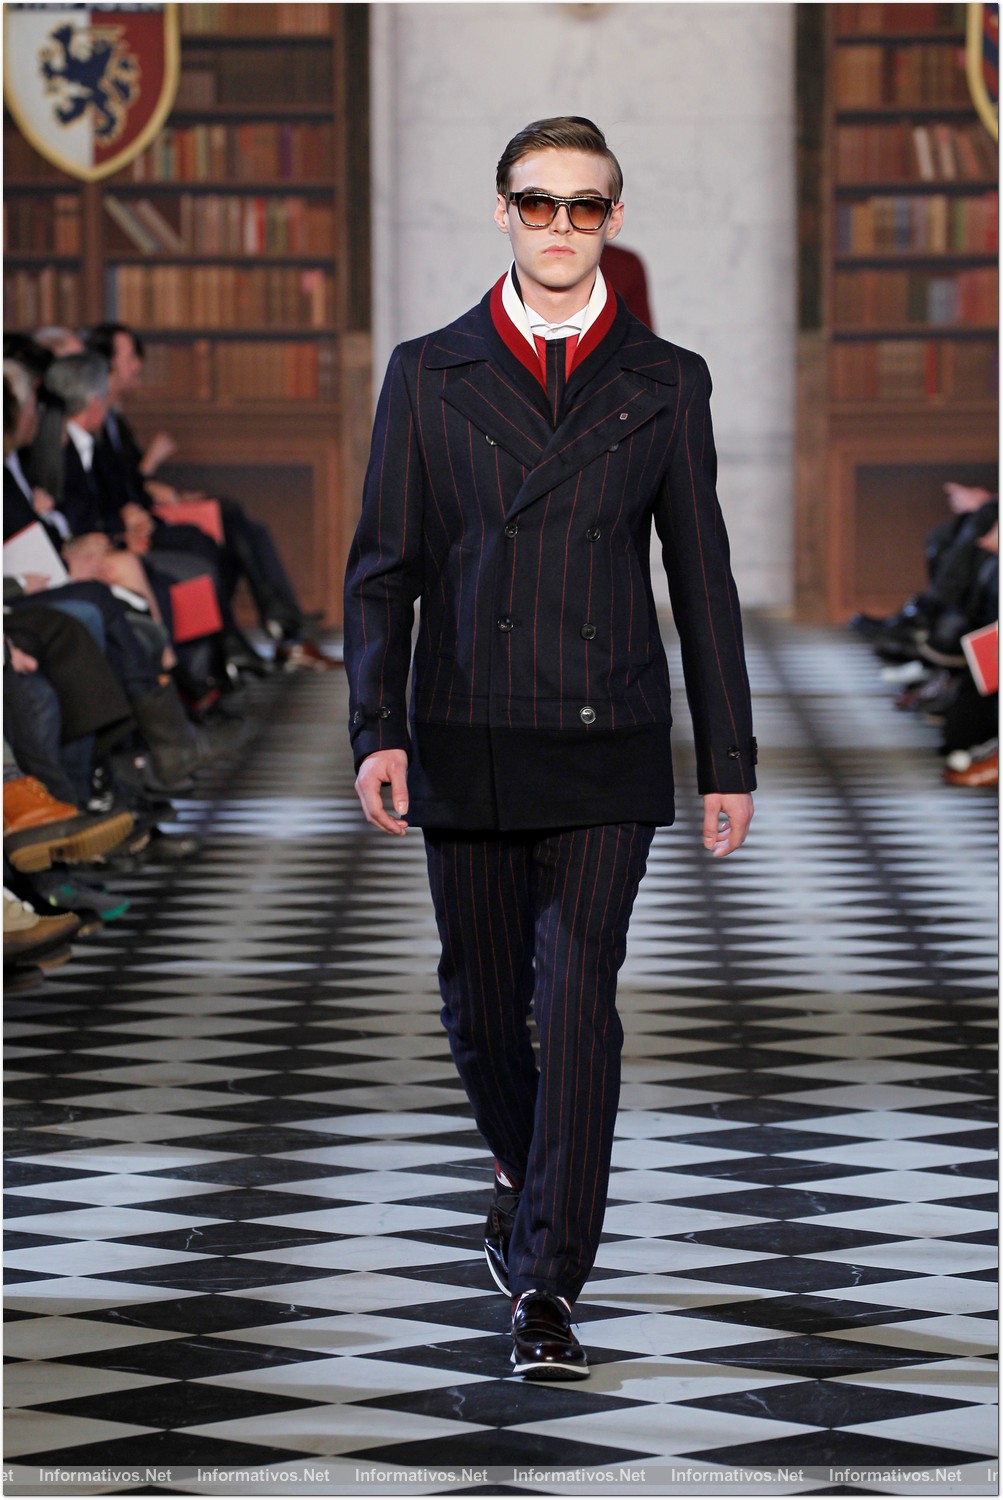 NY08FEB013.- Desfile Tommy Hilfiger Fall 2013 Men's Collection. 29. ROBBIE